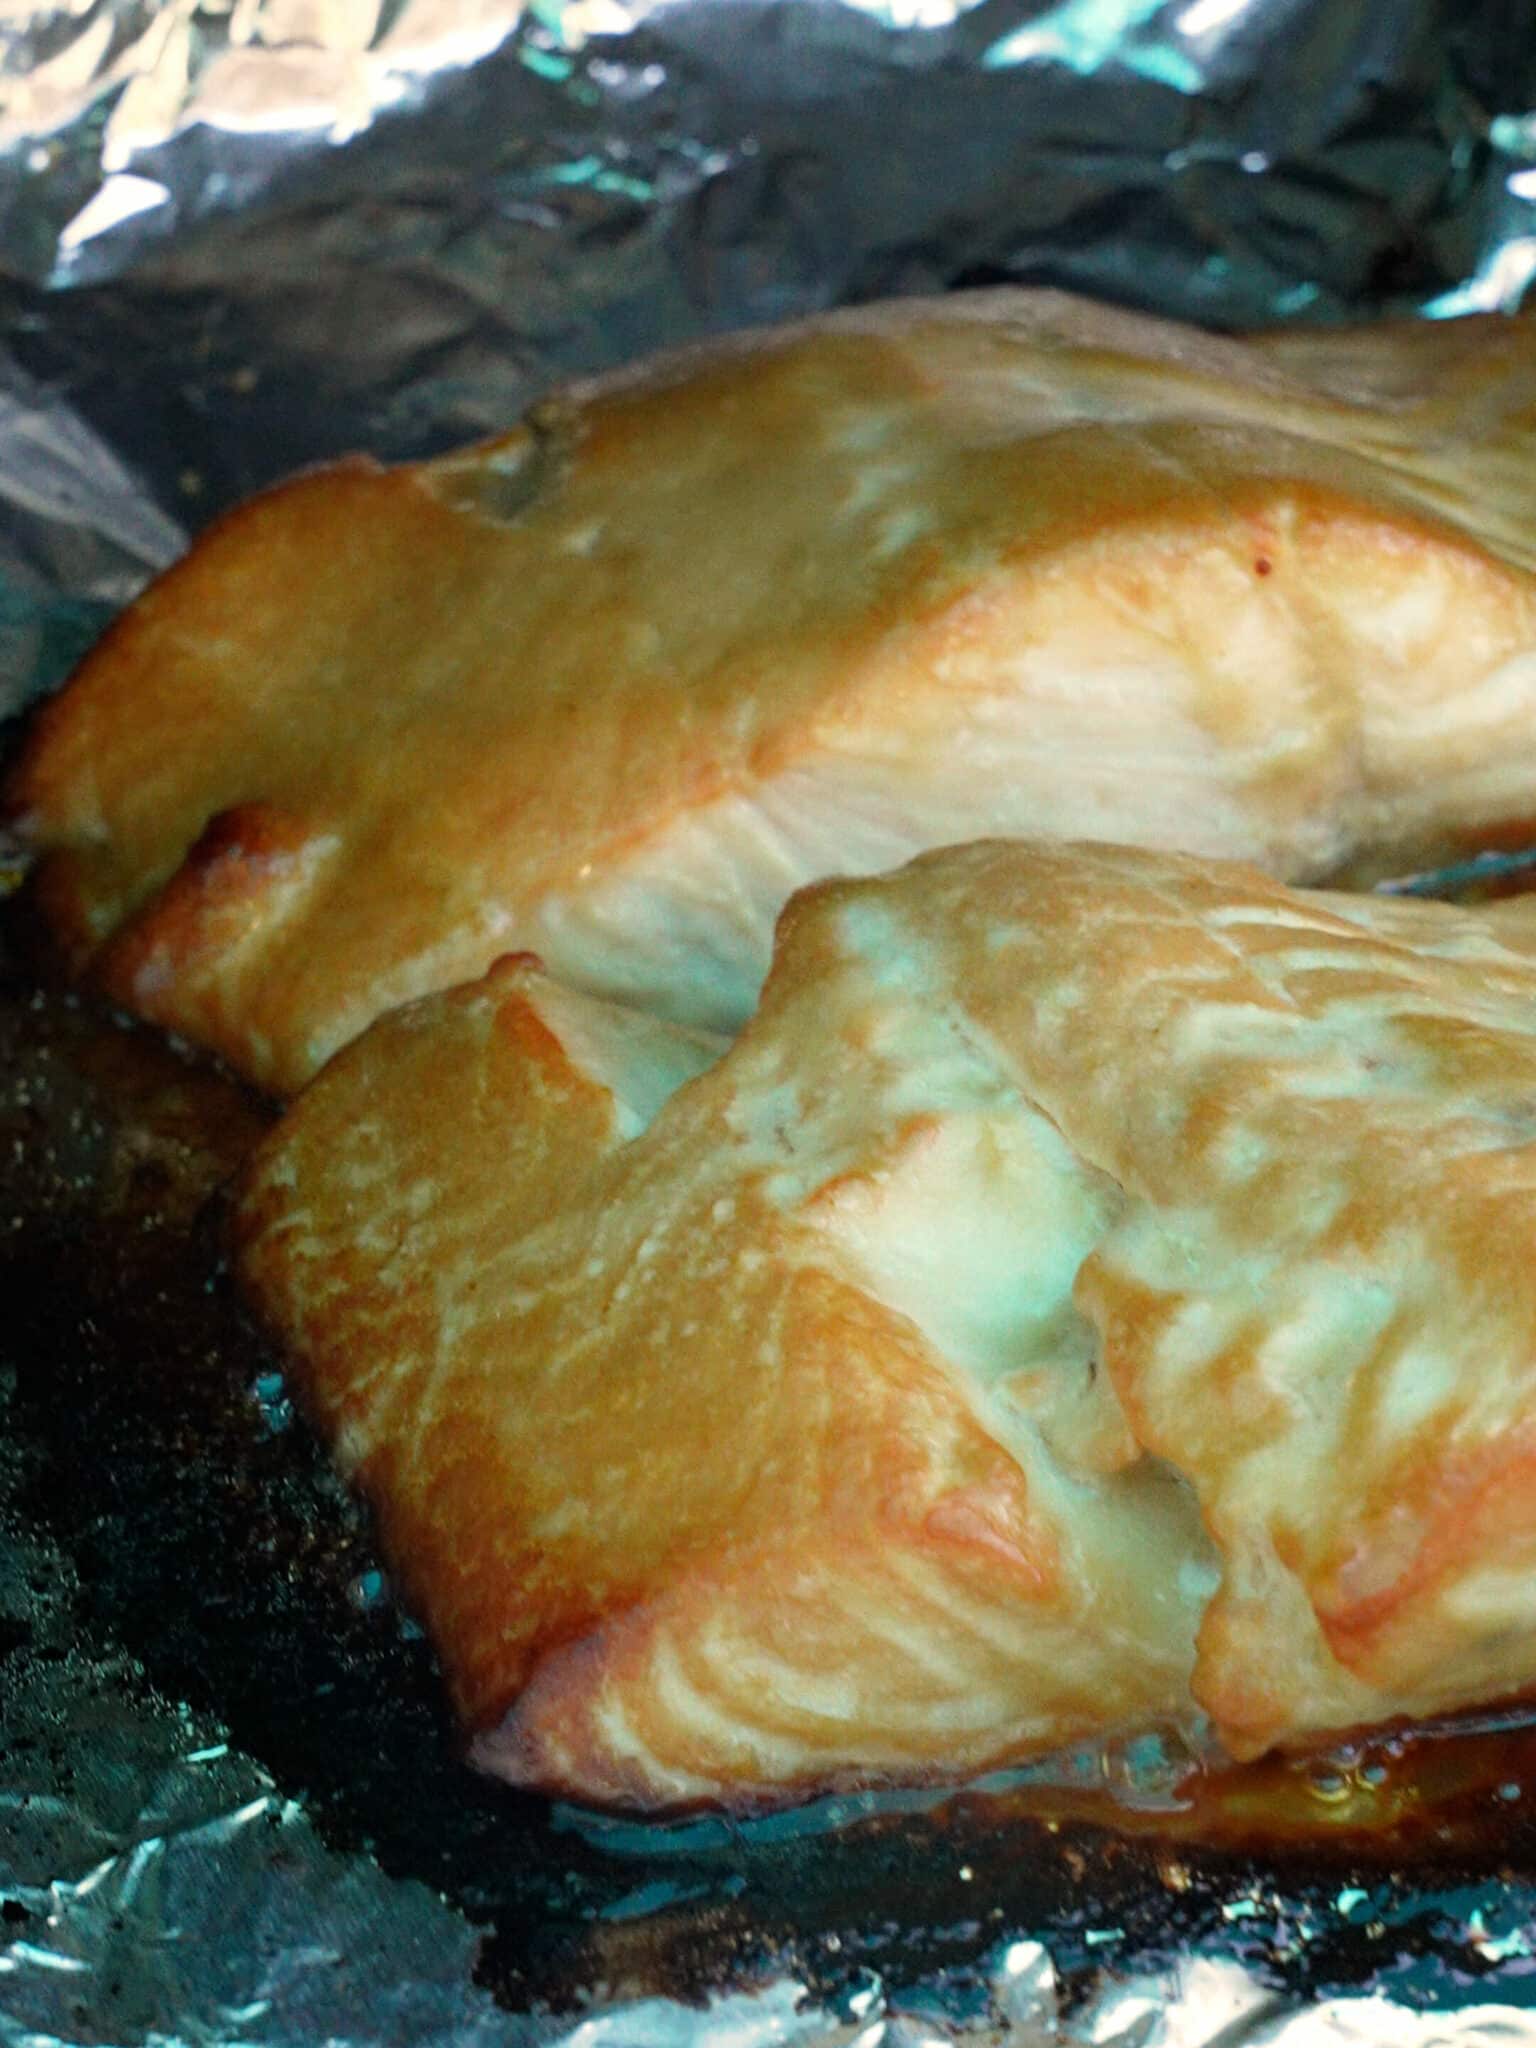 Miso Glazed Salmon baked in the oven.